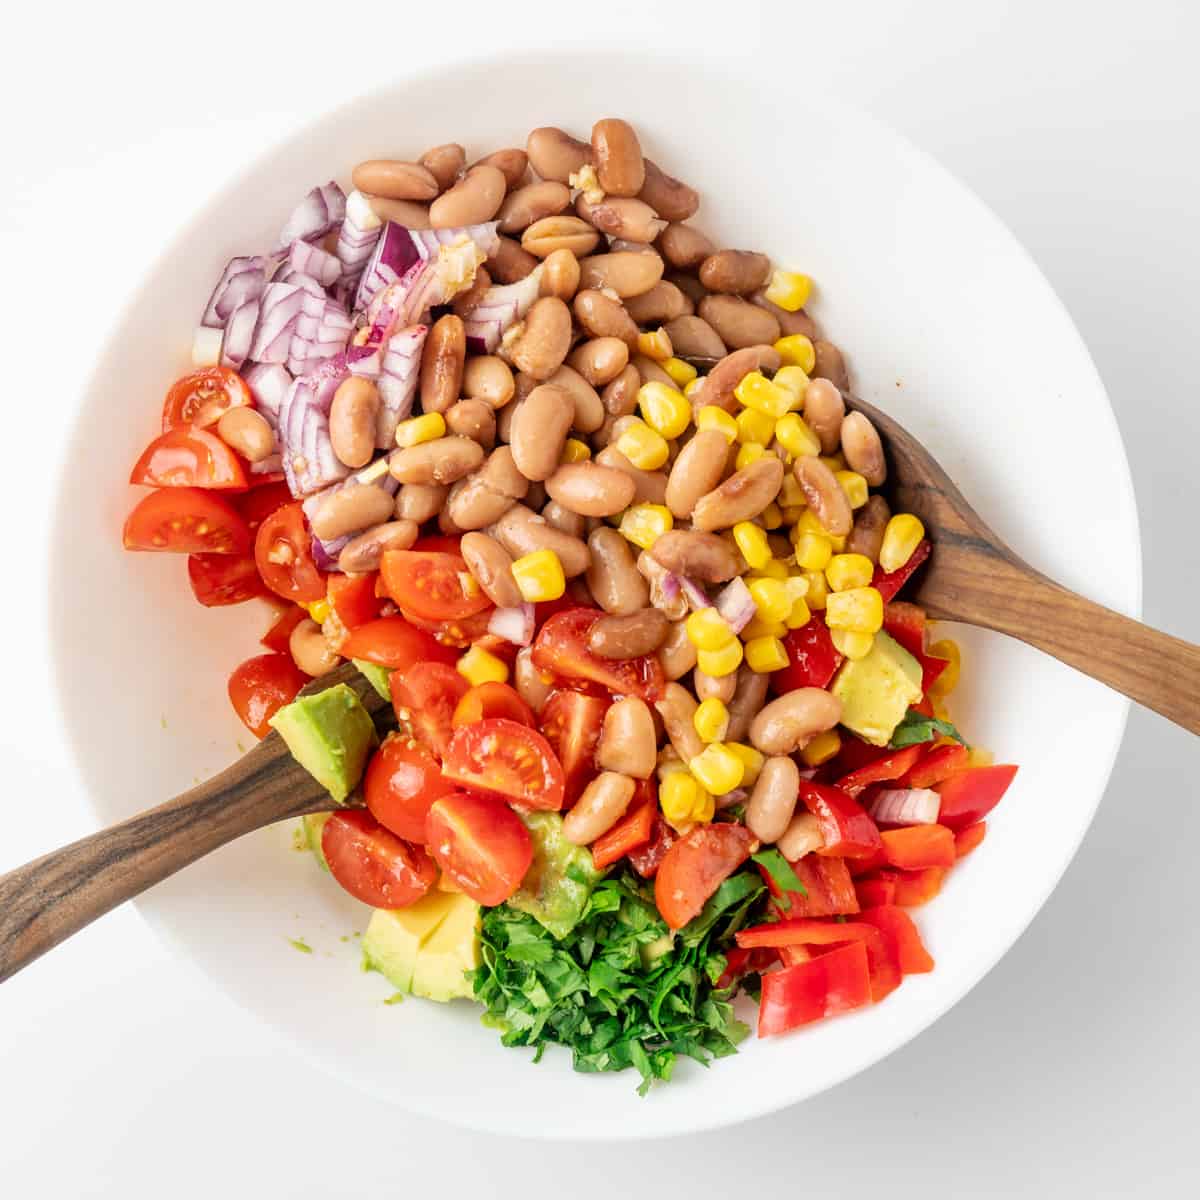 The beans and vegetables are combined with the dressing and stirred through to make the salad.